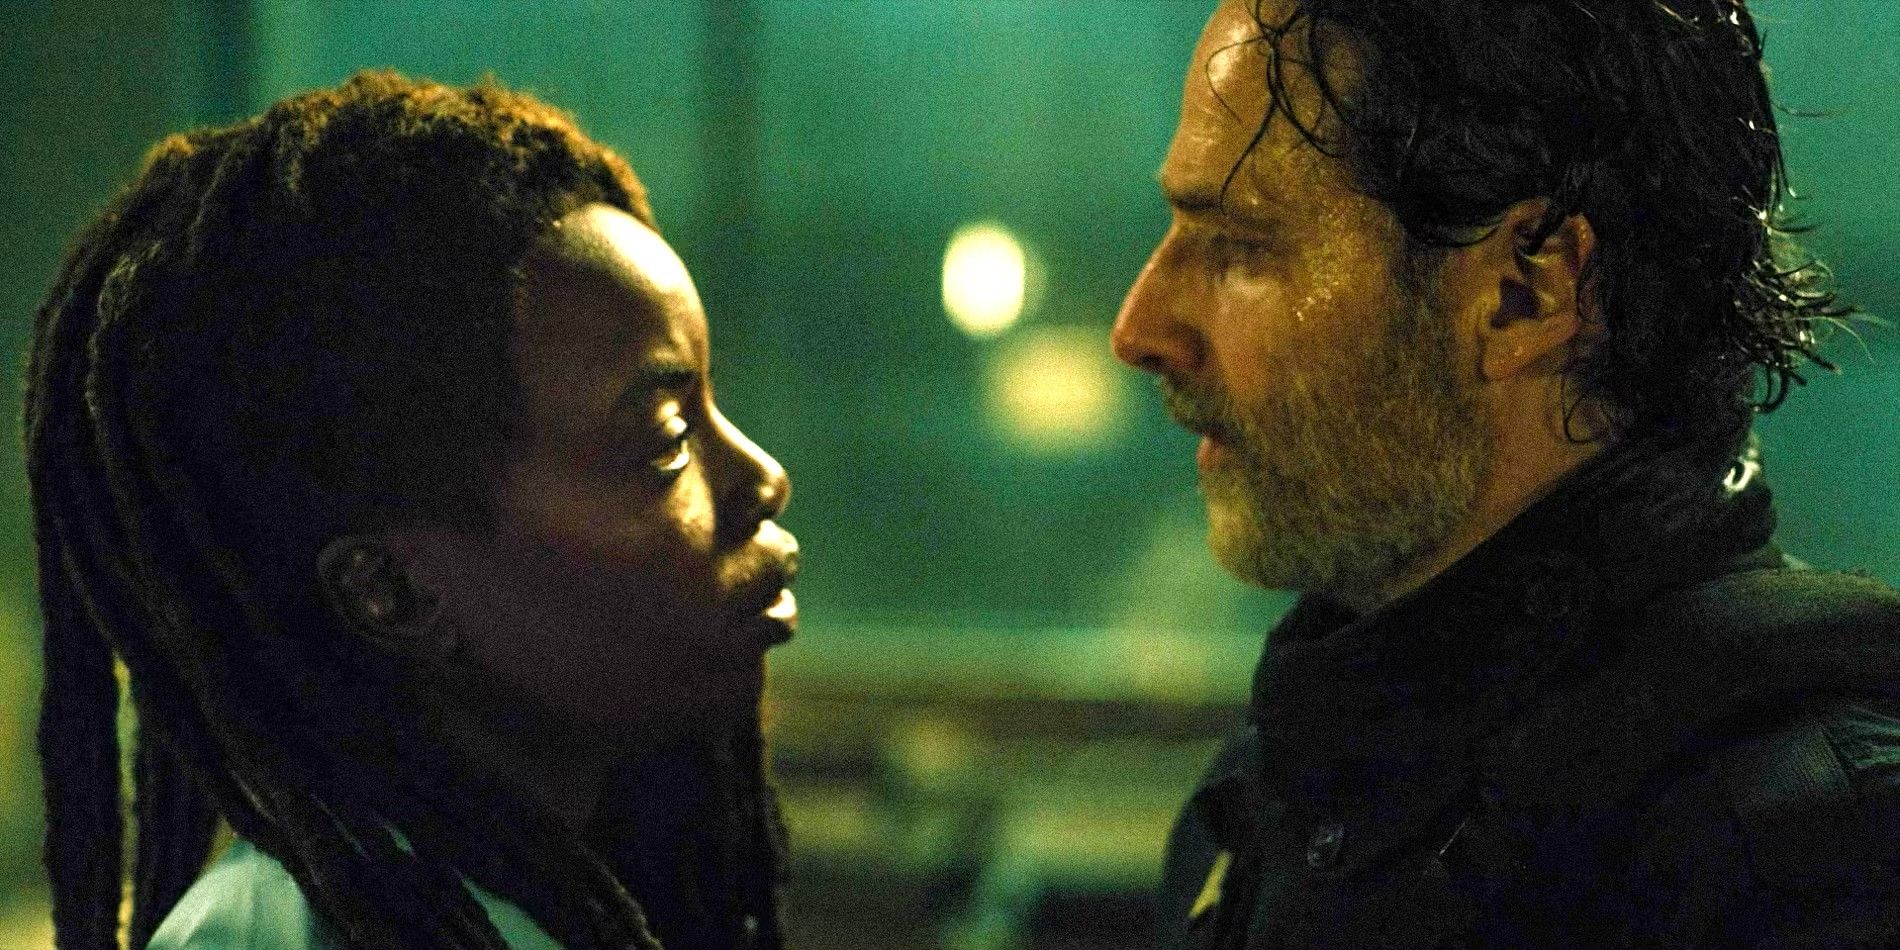 Michonne and Rick arguing in The Walking Dead: The Ones Who Live